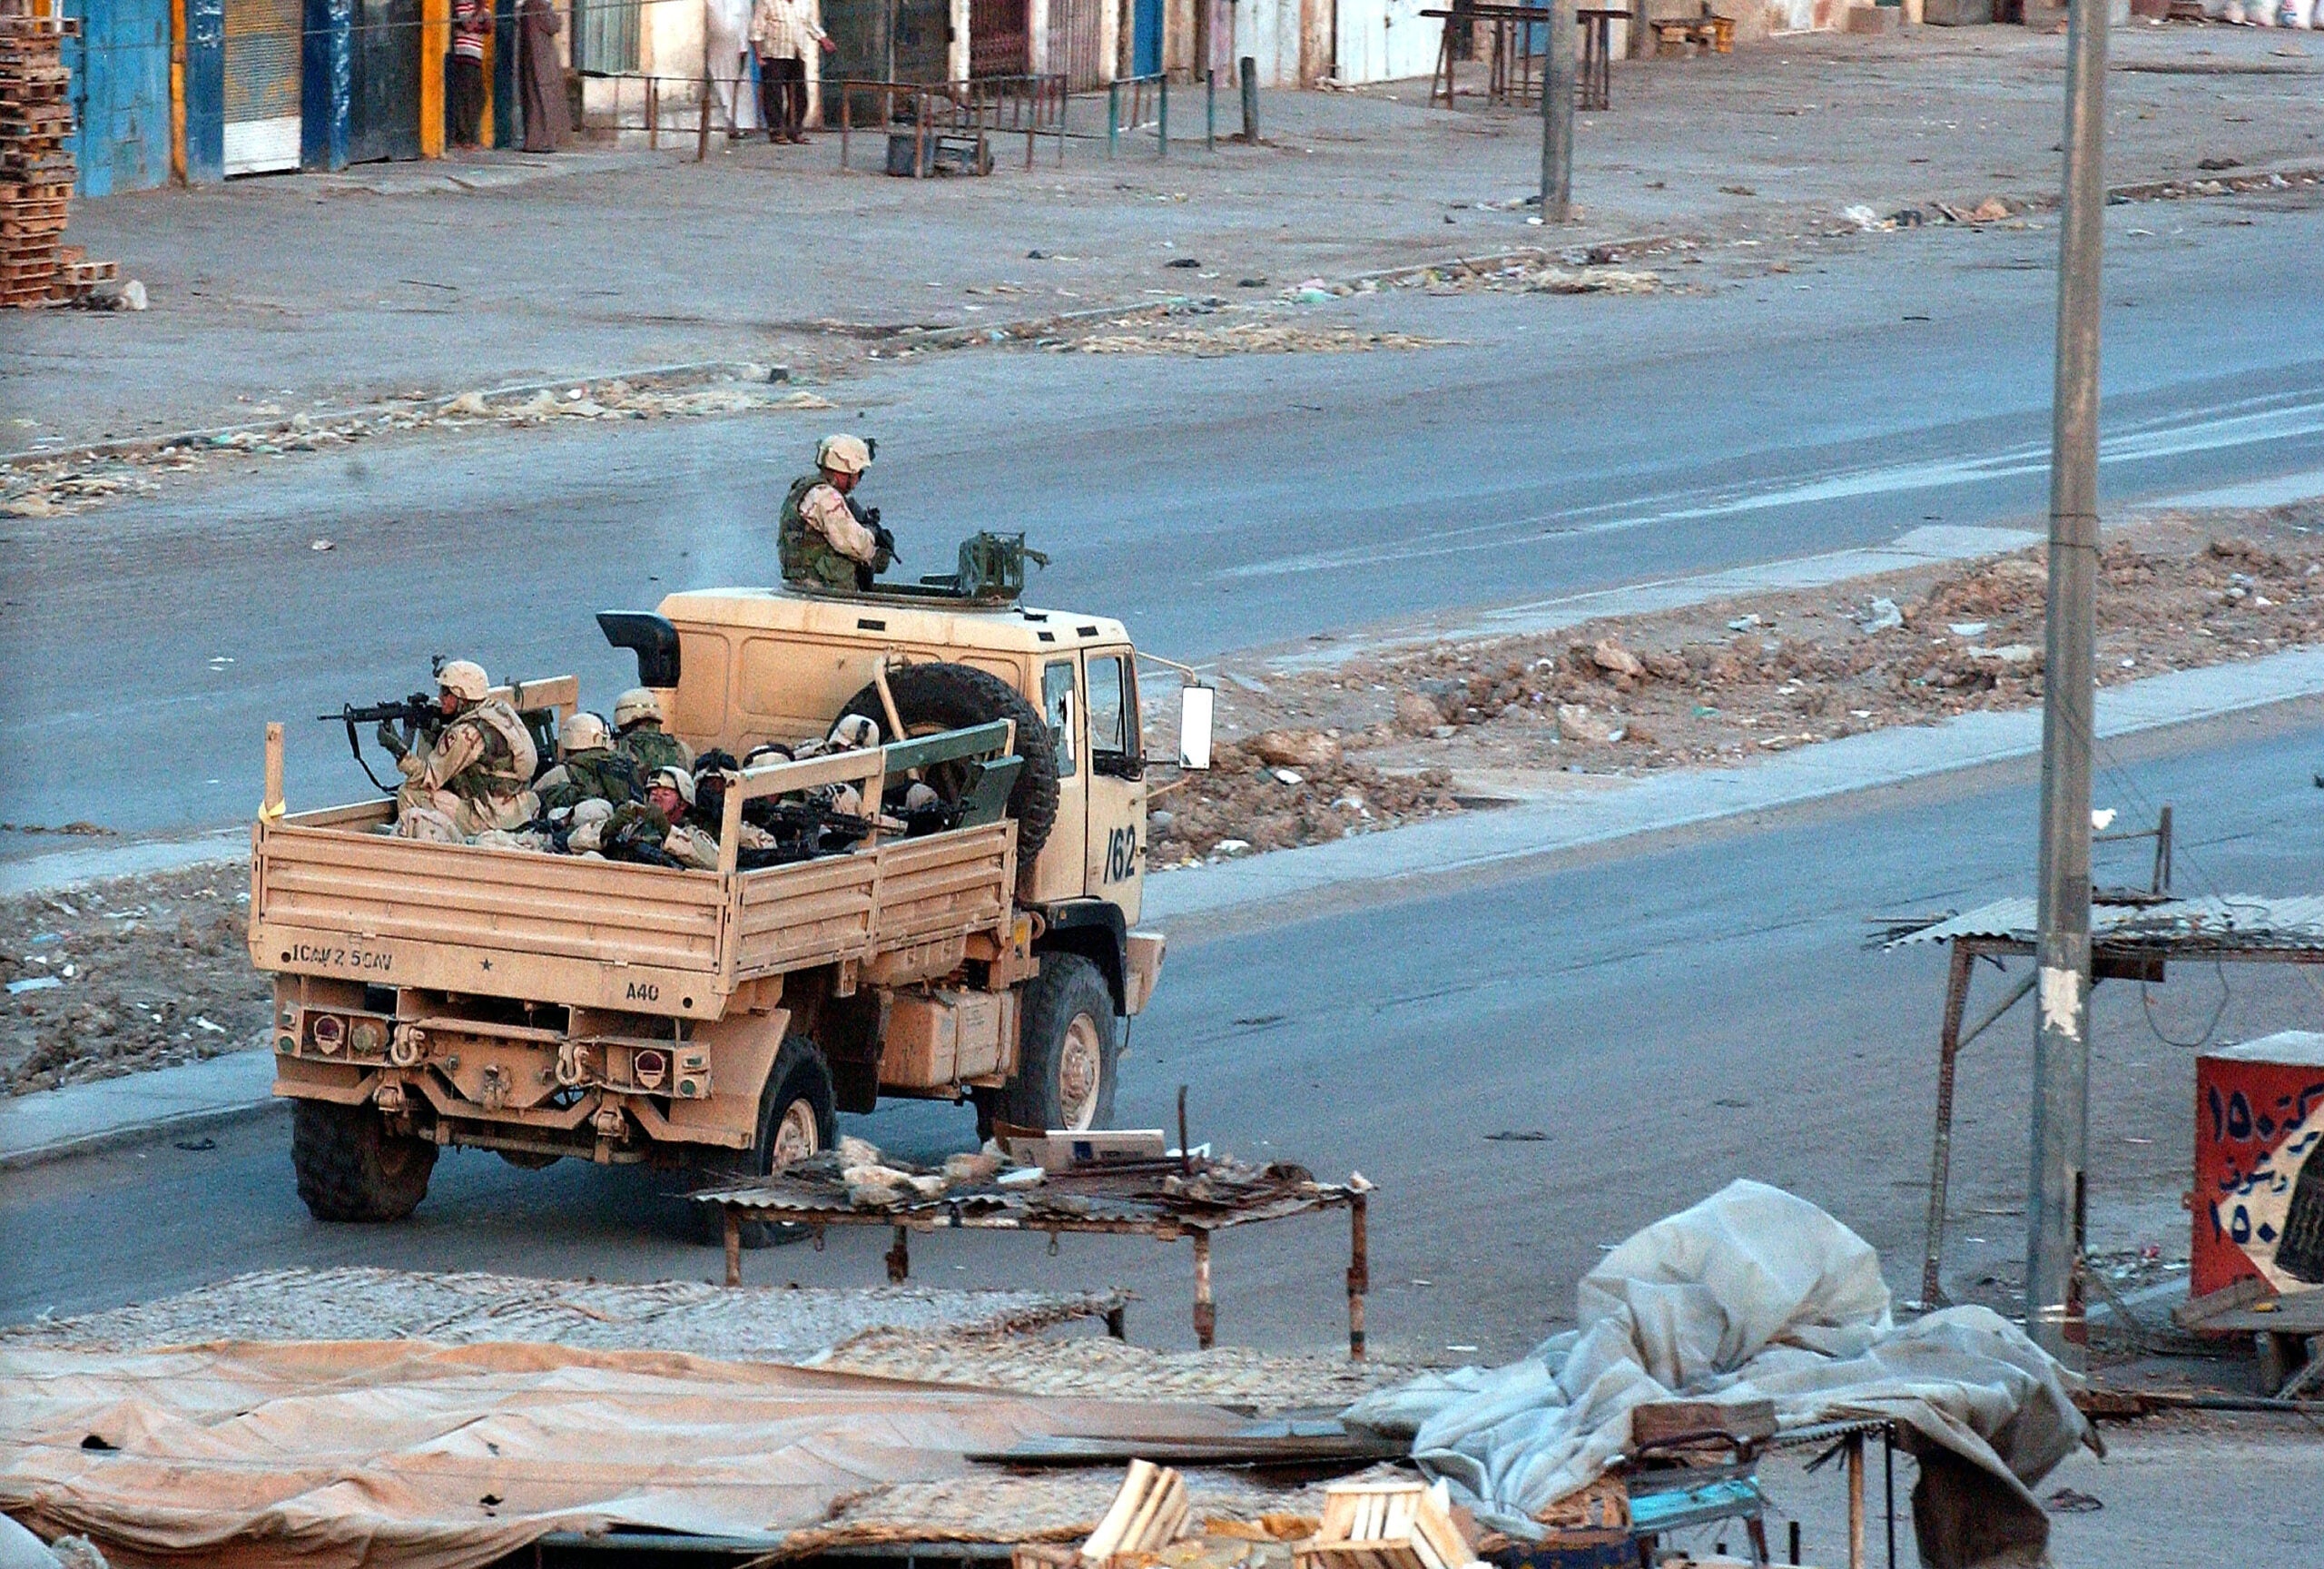 SADR CITY, IRAQ - APRIL 4:  U.S. troops patrol the deserted streets of the sprawling Shia slum of Sadr City at sunset after a day of tense clashes across the country with supporters of controversial Shia cleric Moqtada al-Sadr April 4, 2004 in Sadr City, Iraq. Sadr city, a power base of the young firebrand cleric, is the home of several million poor Shi'ites and sits at the eastern edge of the capital Baghdad.  Earlier, in the southern city of Najaf, protestors and Sadr gunmen opened fire on a coalition base, sparking a thee hour gun battle that left 4 El Salvadoran soldiers and 14 Iraqis dead, and dozens more wounded.   (Photo by Wathiq Khuzaie/Getty Images)